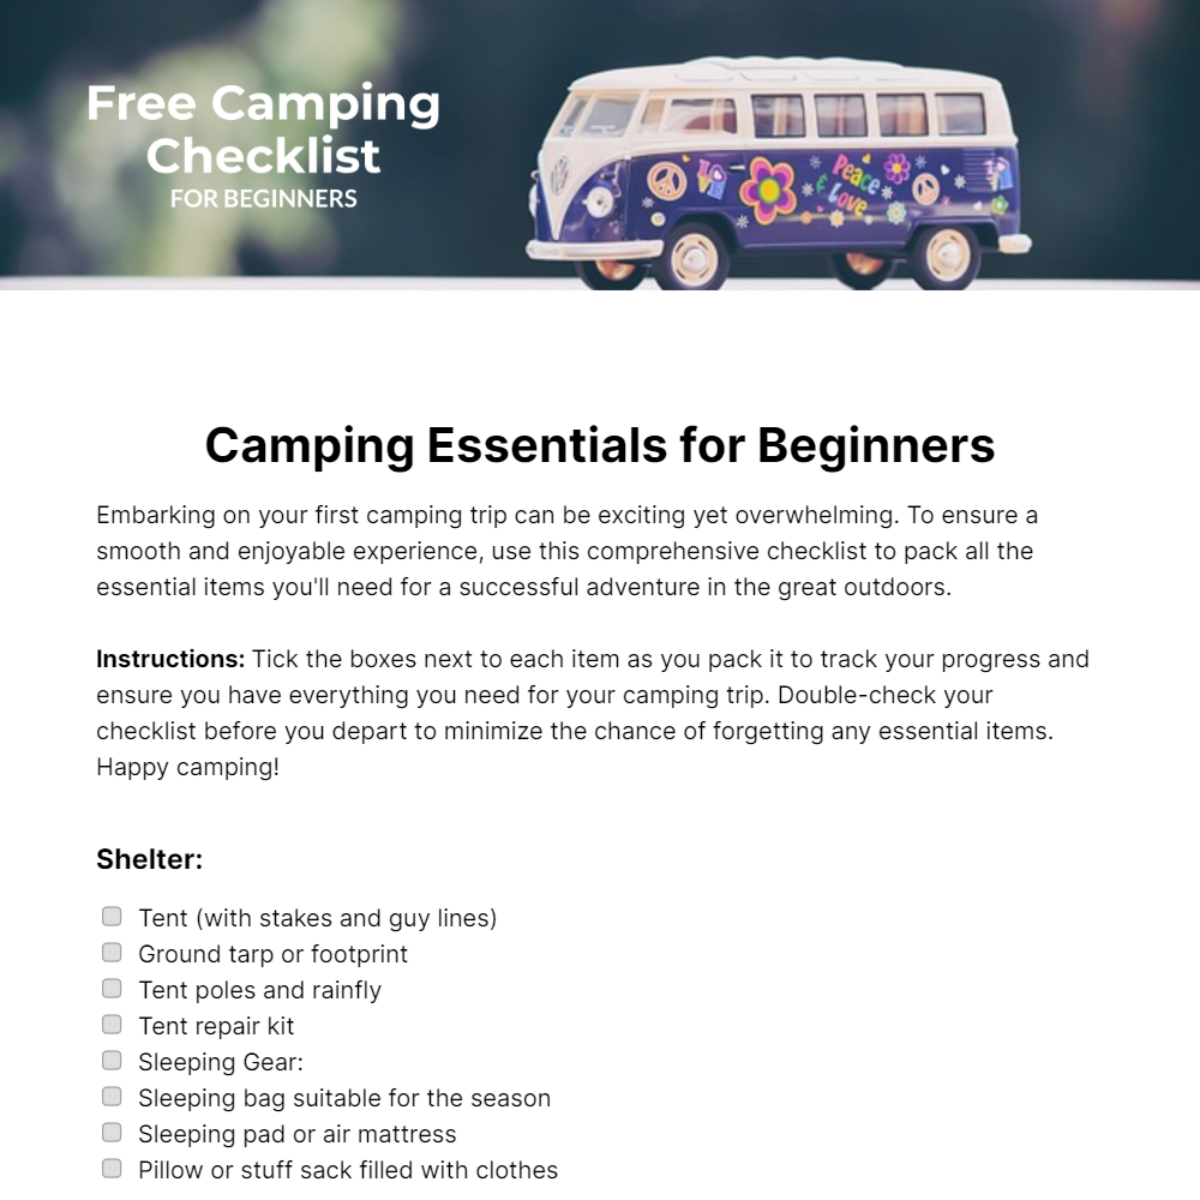 Free Camping Checklist For Beginners Template